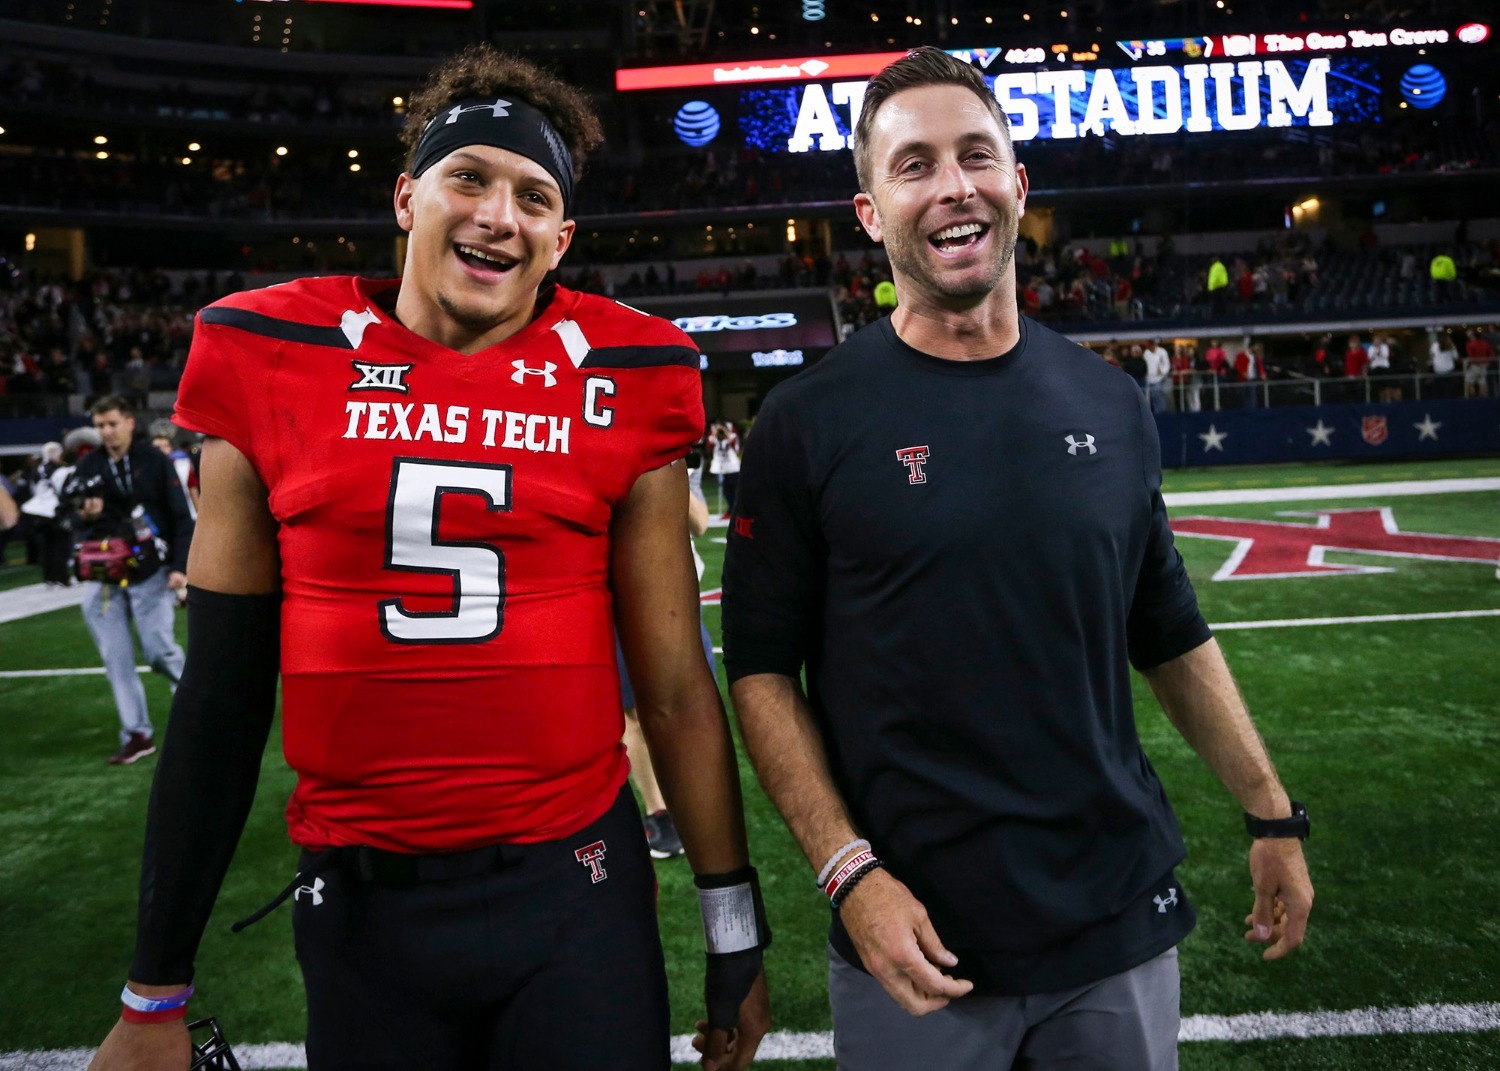 Patrick Mahomes made Kliff Kingsbury look like Nostradamus after signing a record-breaking contract on Monday.